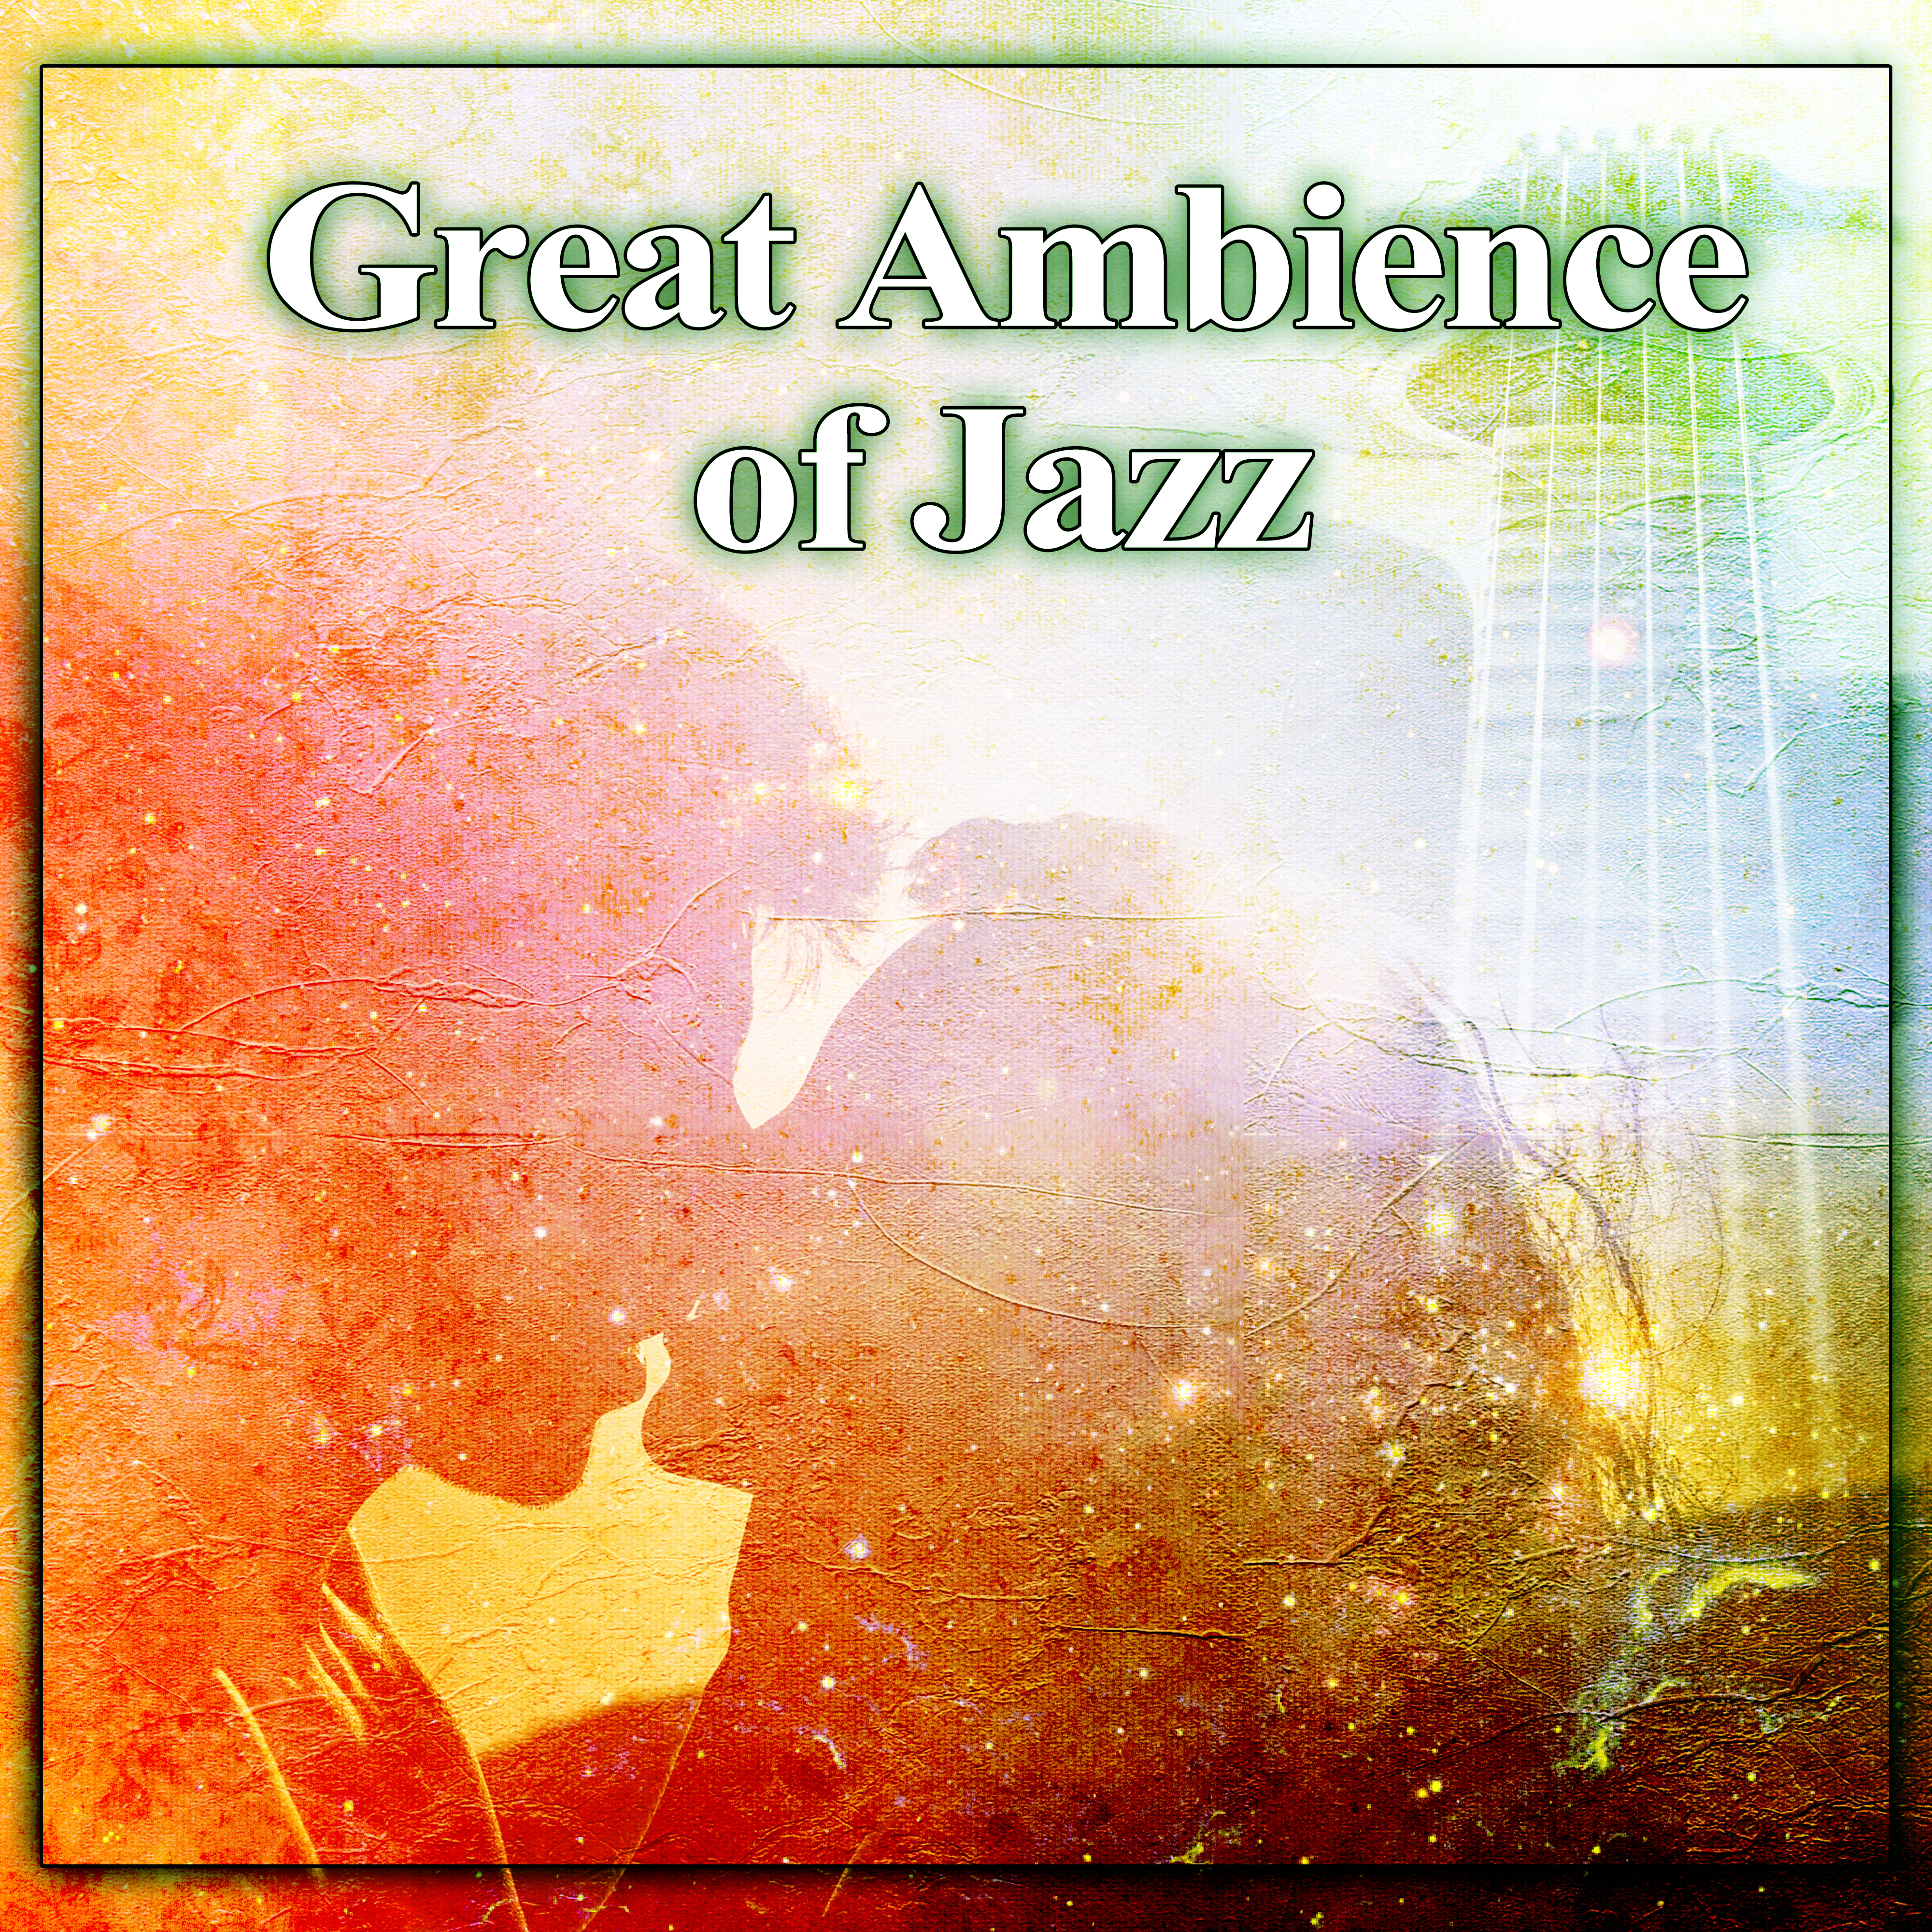 Great Ambience of Jazz  Mellow Piano Sounds, Jazz Romance, Soothing Music for Lovers